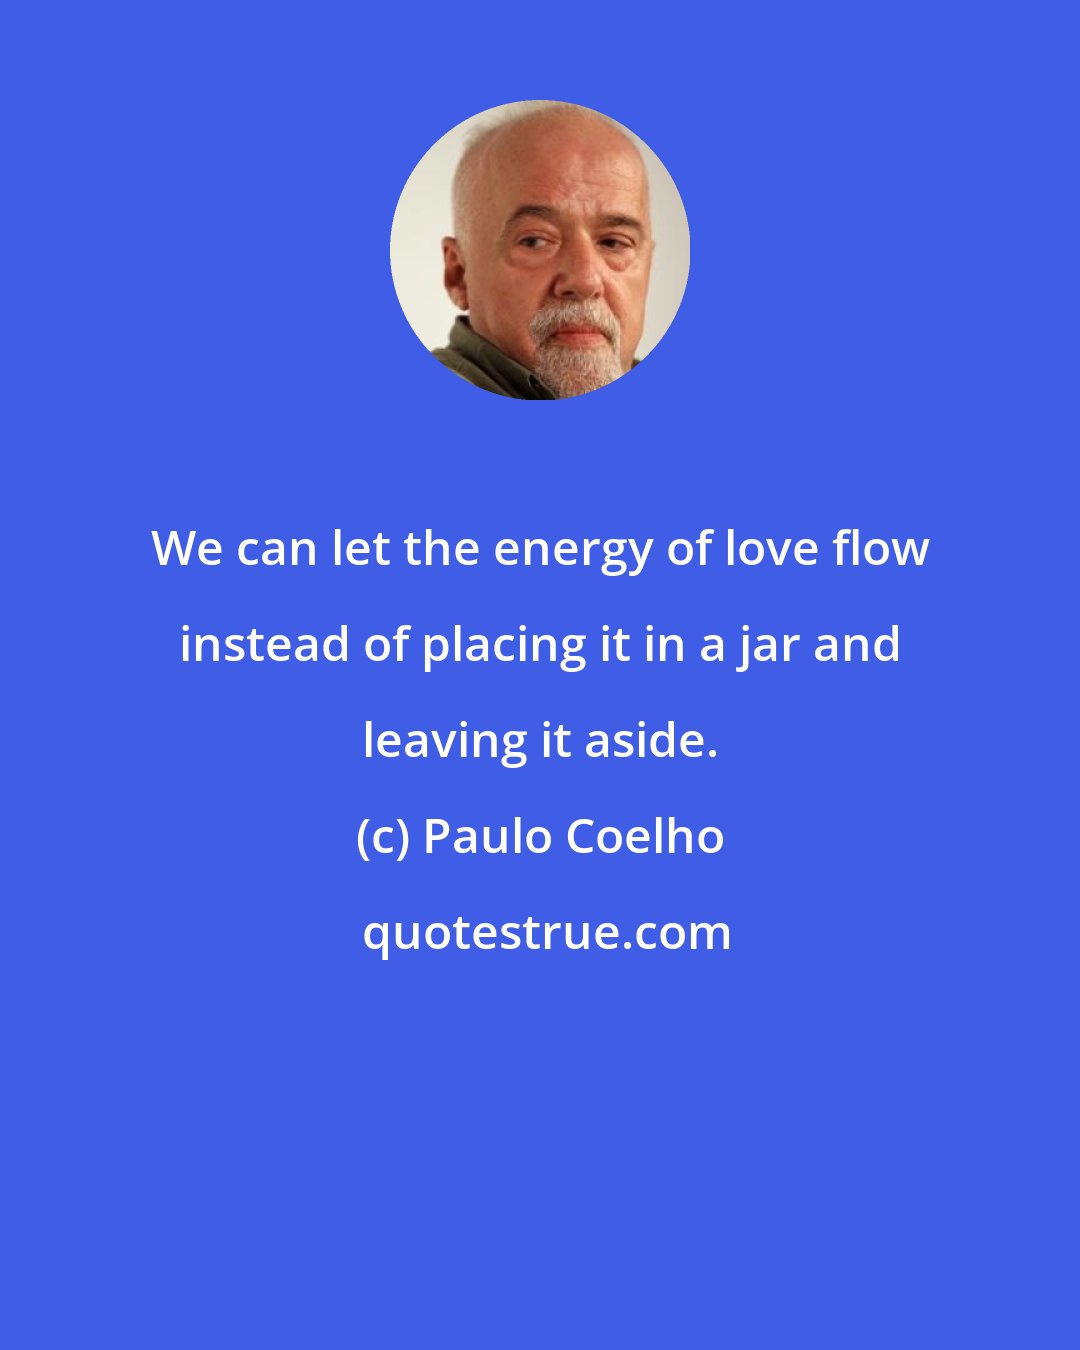 Paulo Coelho: We can let the energy of love flow instead of placing it in a jar and leaving it aside.